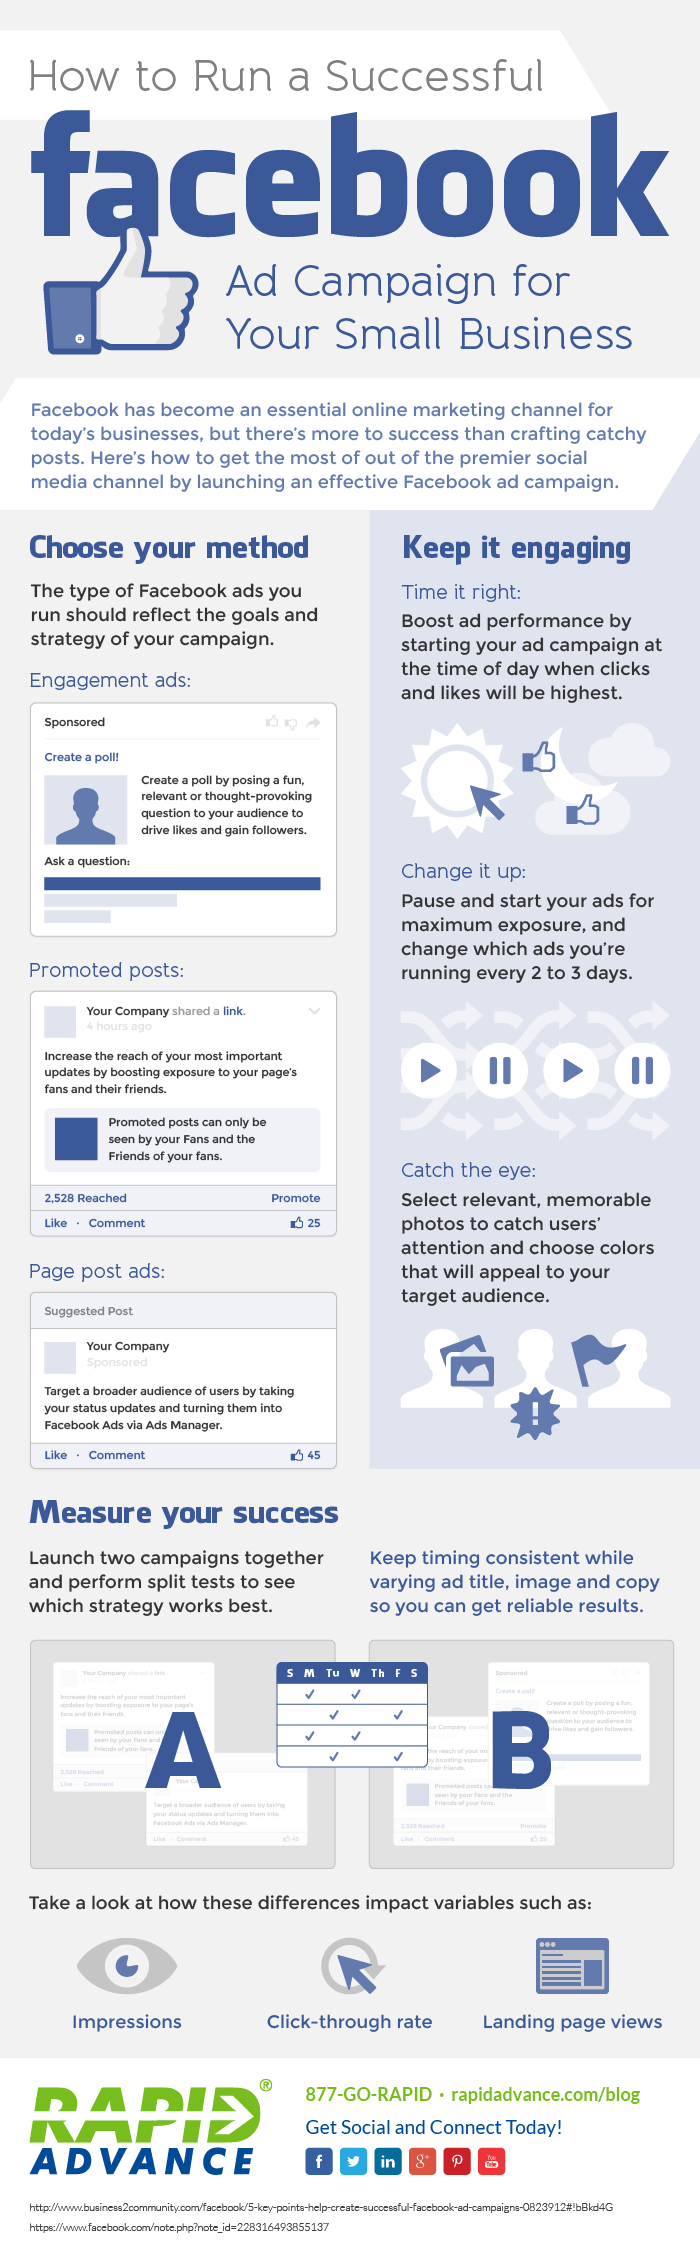 Infographic: How to Run a Successful Facebook Ad Campaign for Your Small Business